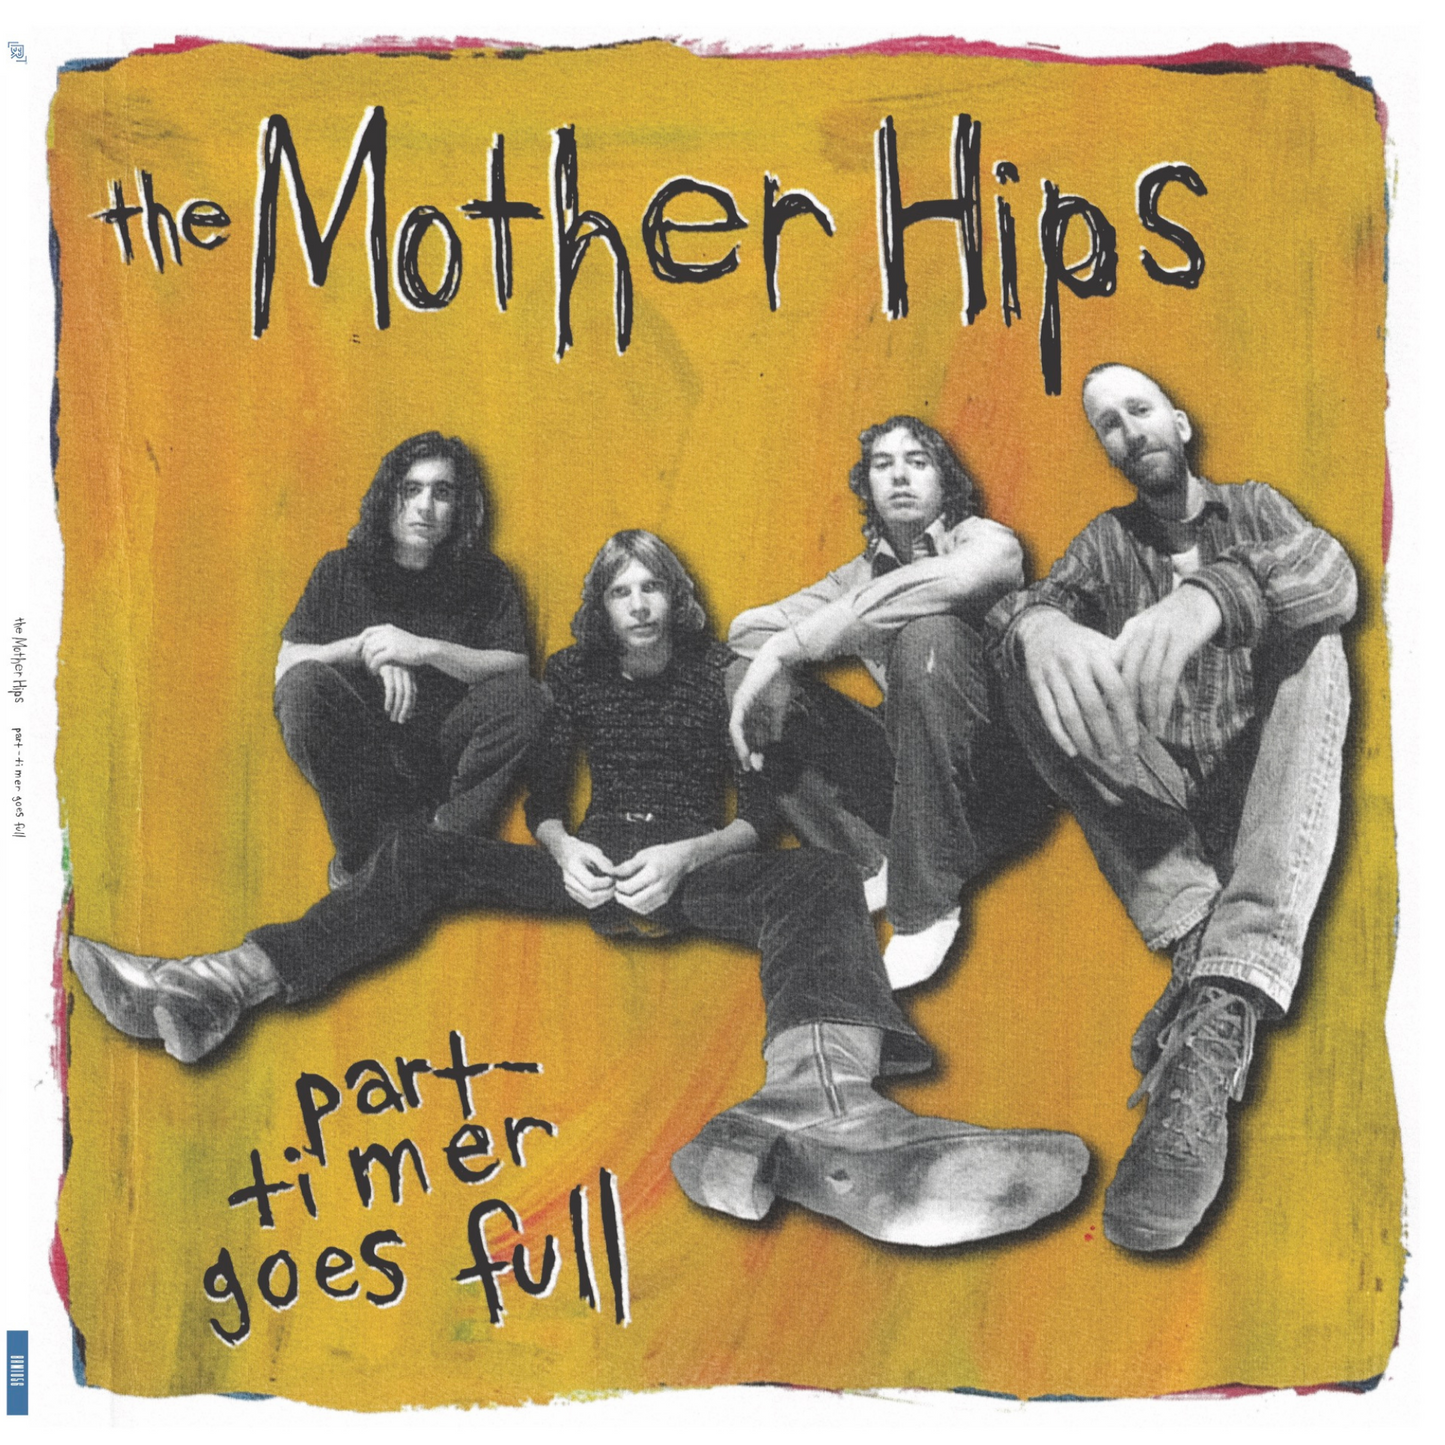 The Mother Hips - "Part-Timer Goes Full" DOUBLE Vinyl (Limited Edition, 30th Anniversary)